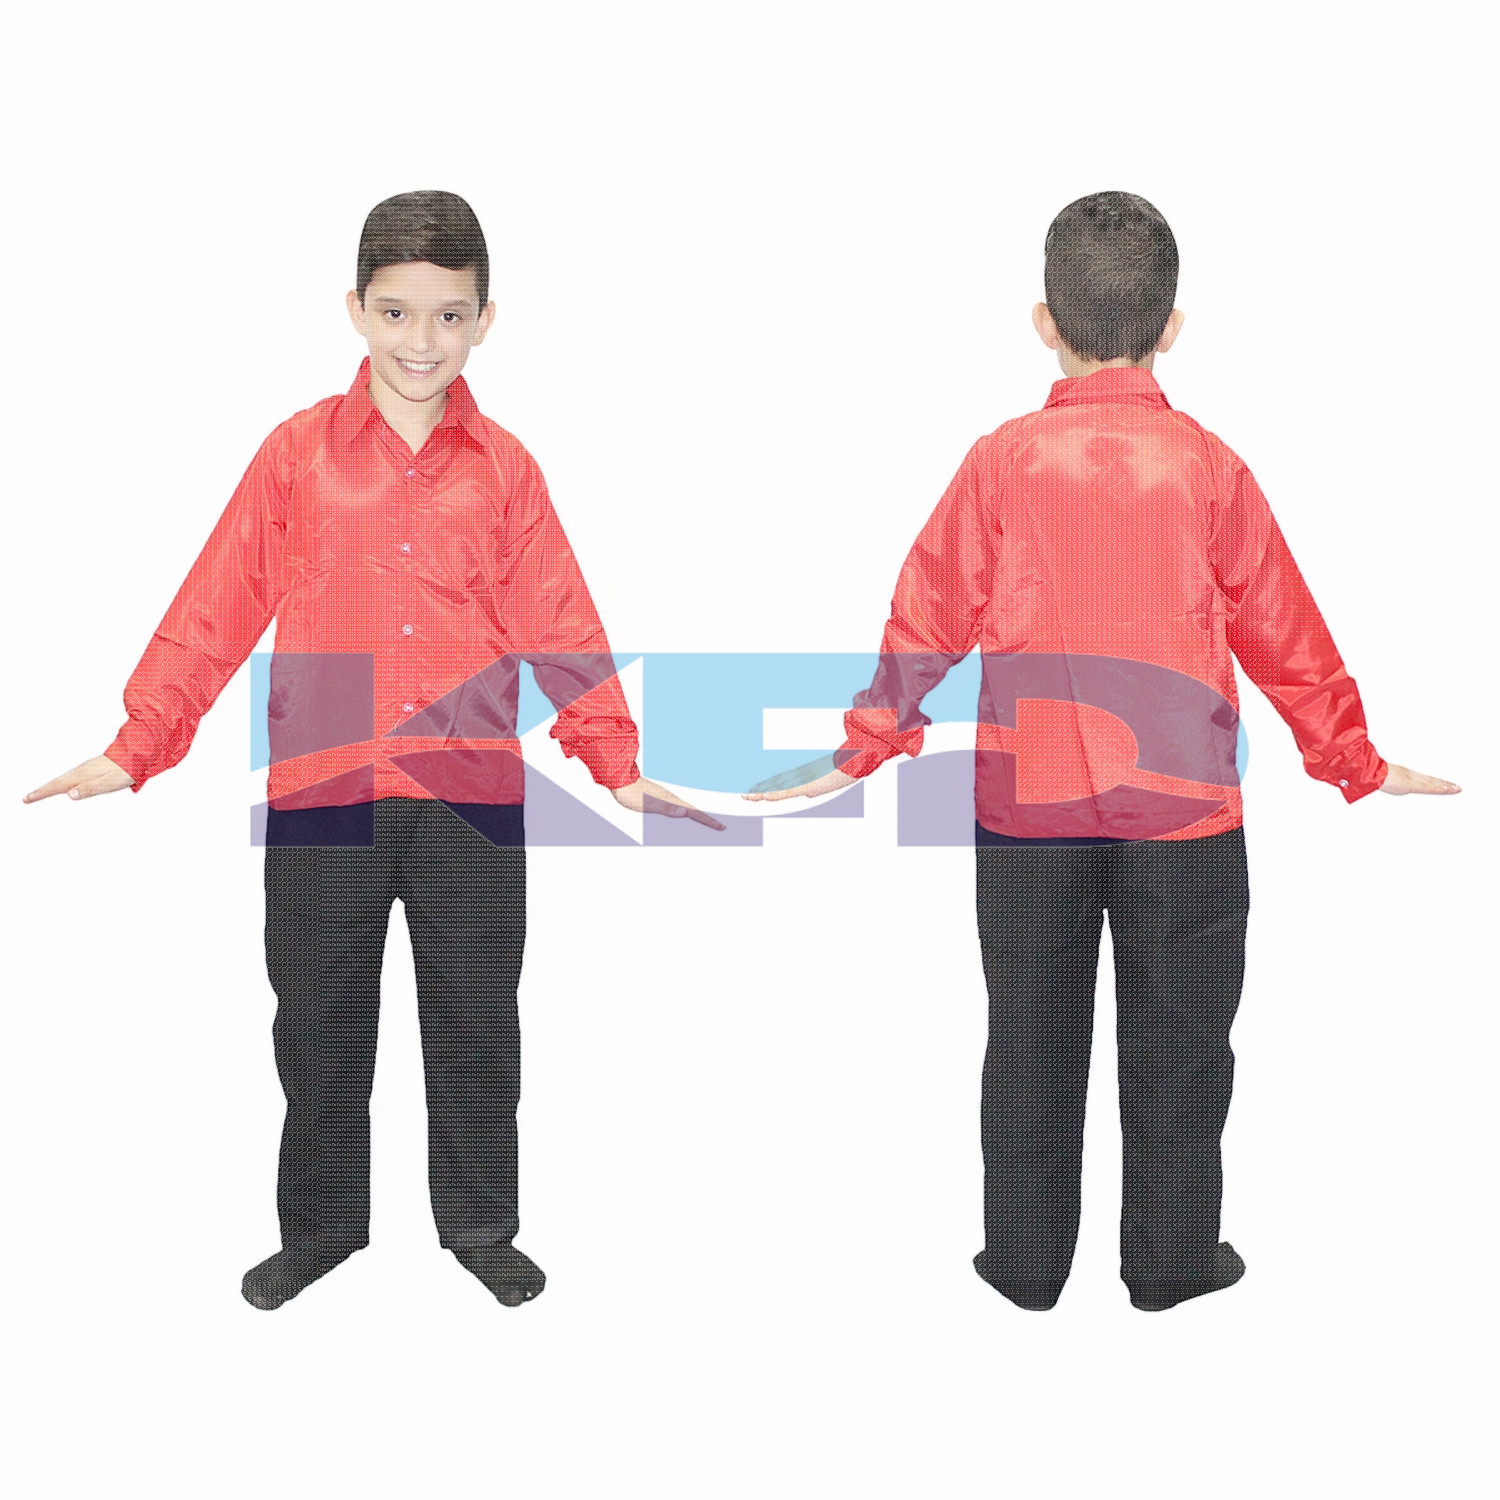 Red shirt fancy dress for kids,Western Costume for Annual function/Theme Party/Competition/Stage Shows/Birthday Party Dress laten dance/salsa dance